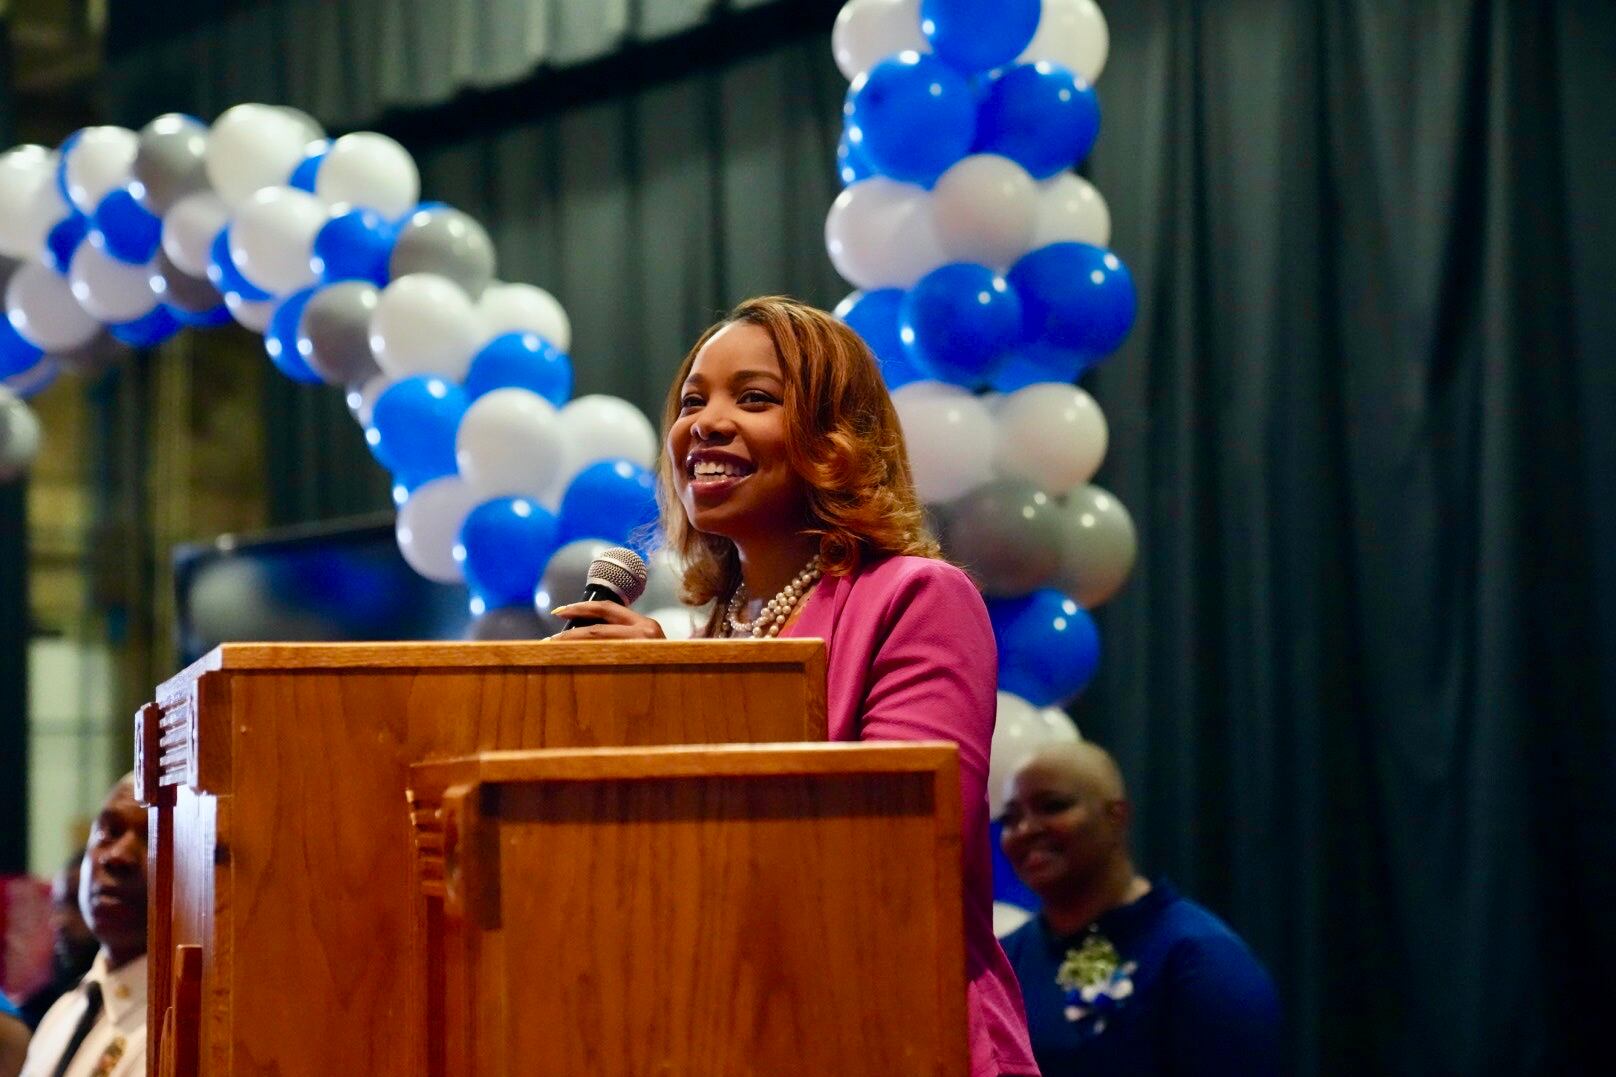 A woman standing in front of an arch of blue and white balloons speaks at a podium